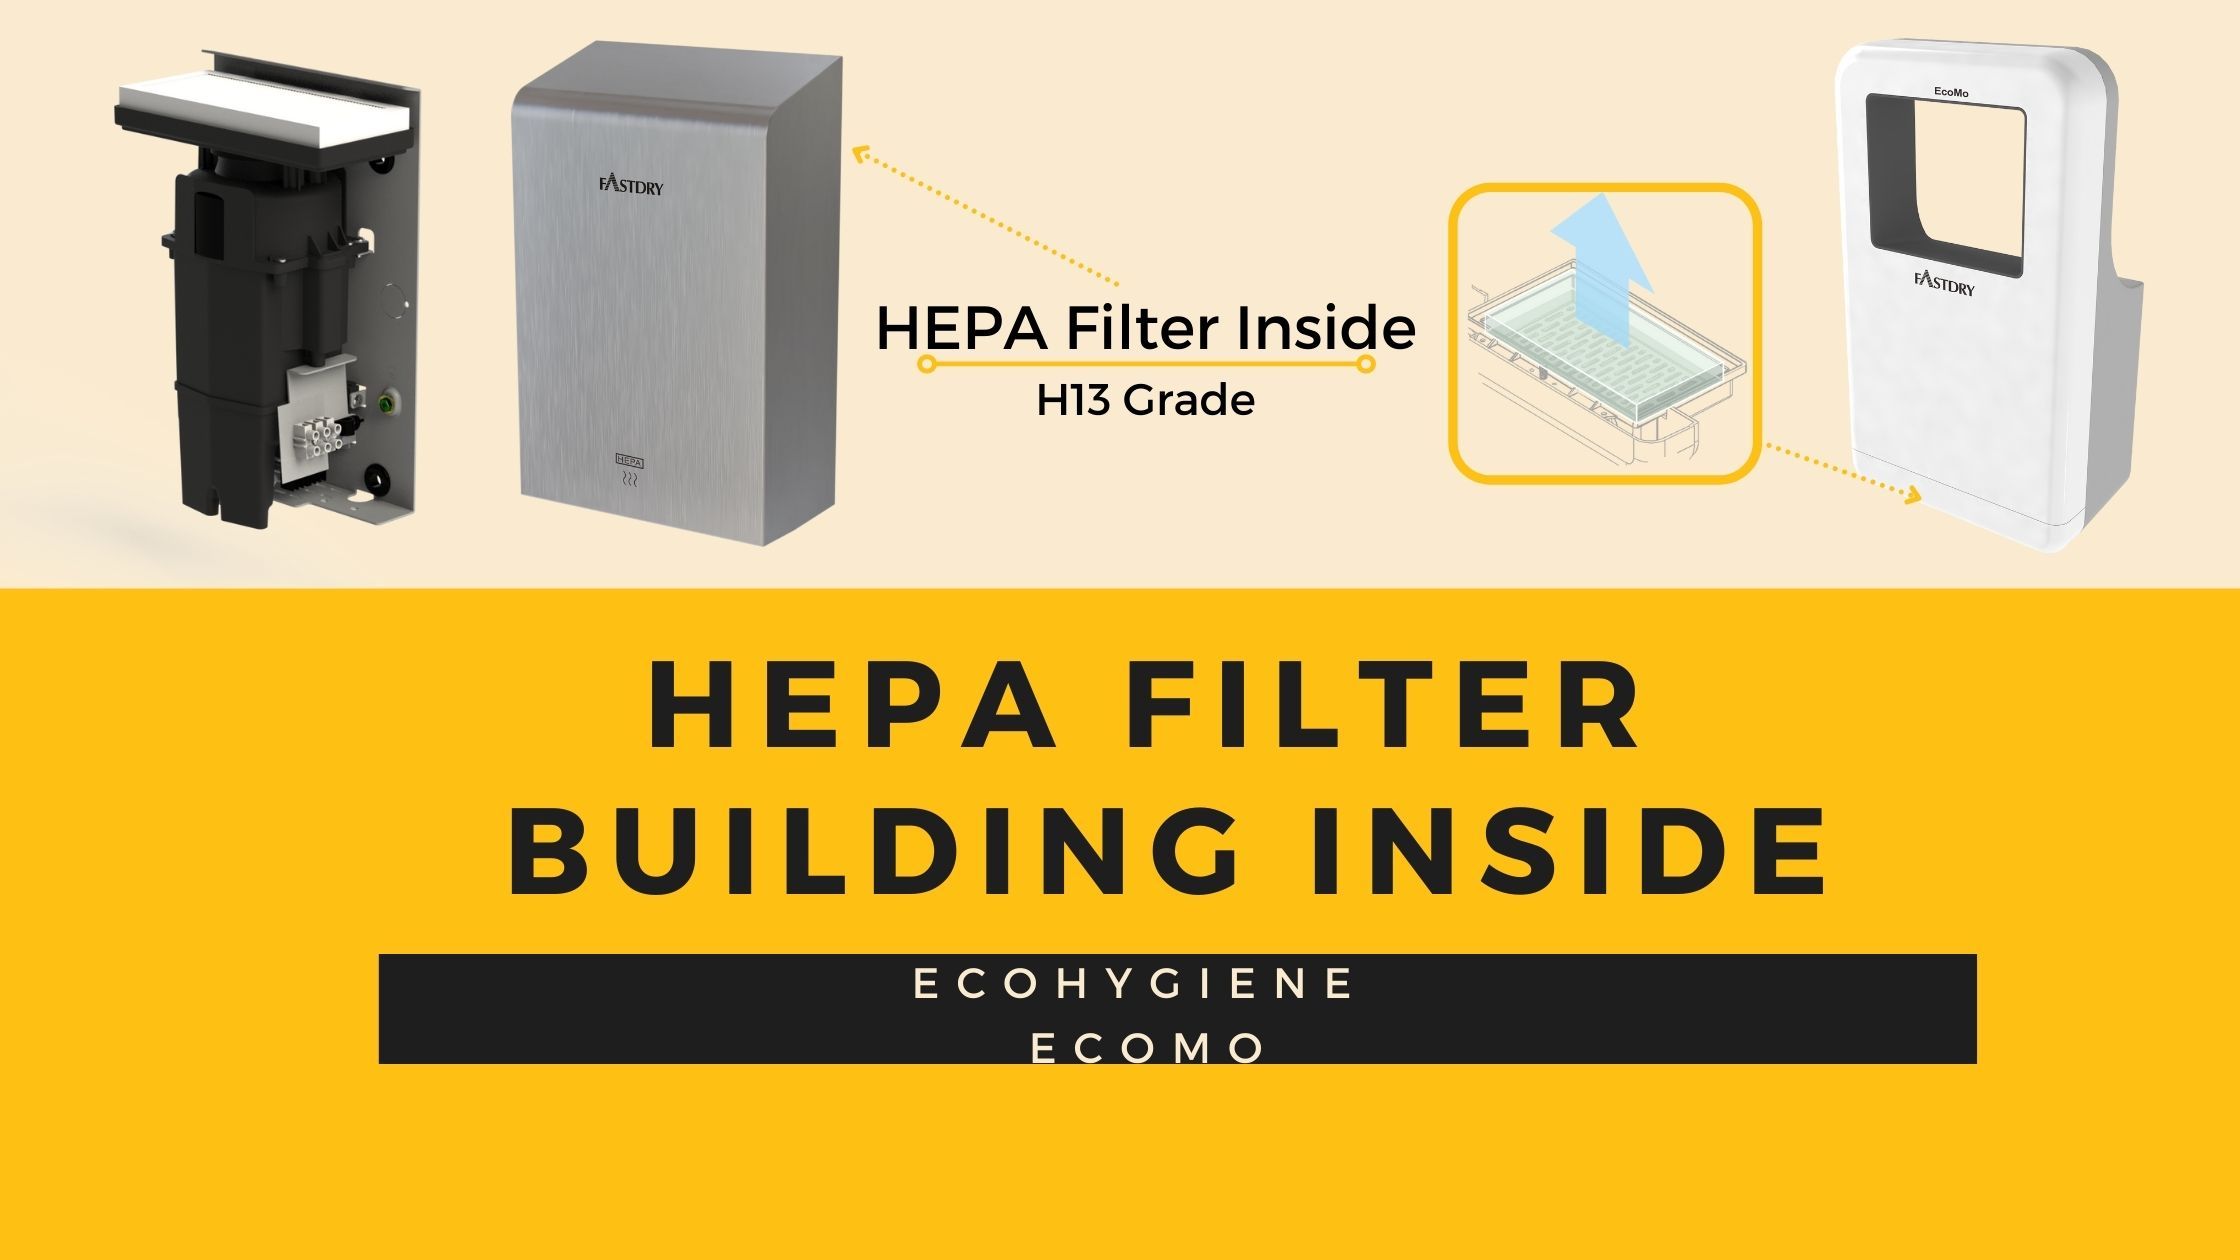 Hand Dryers With Heap Filter Building Inside